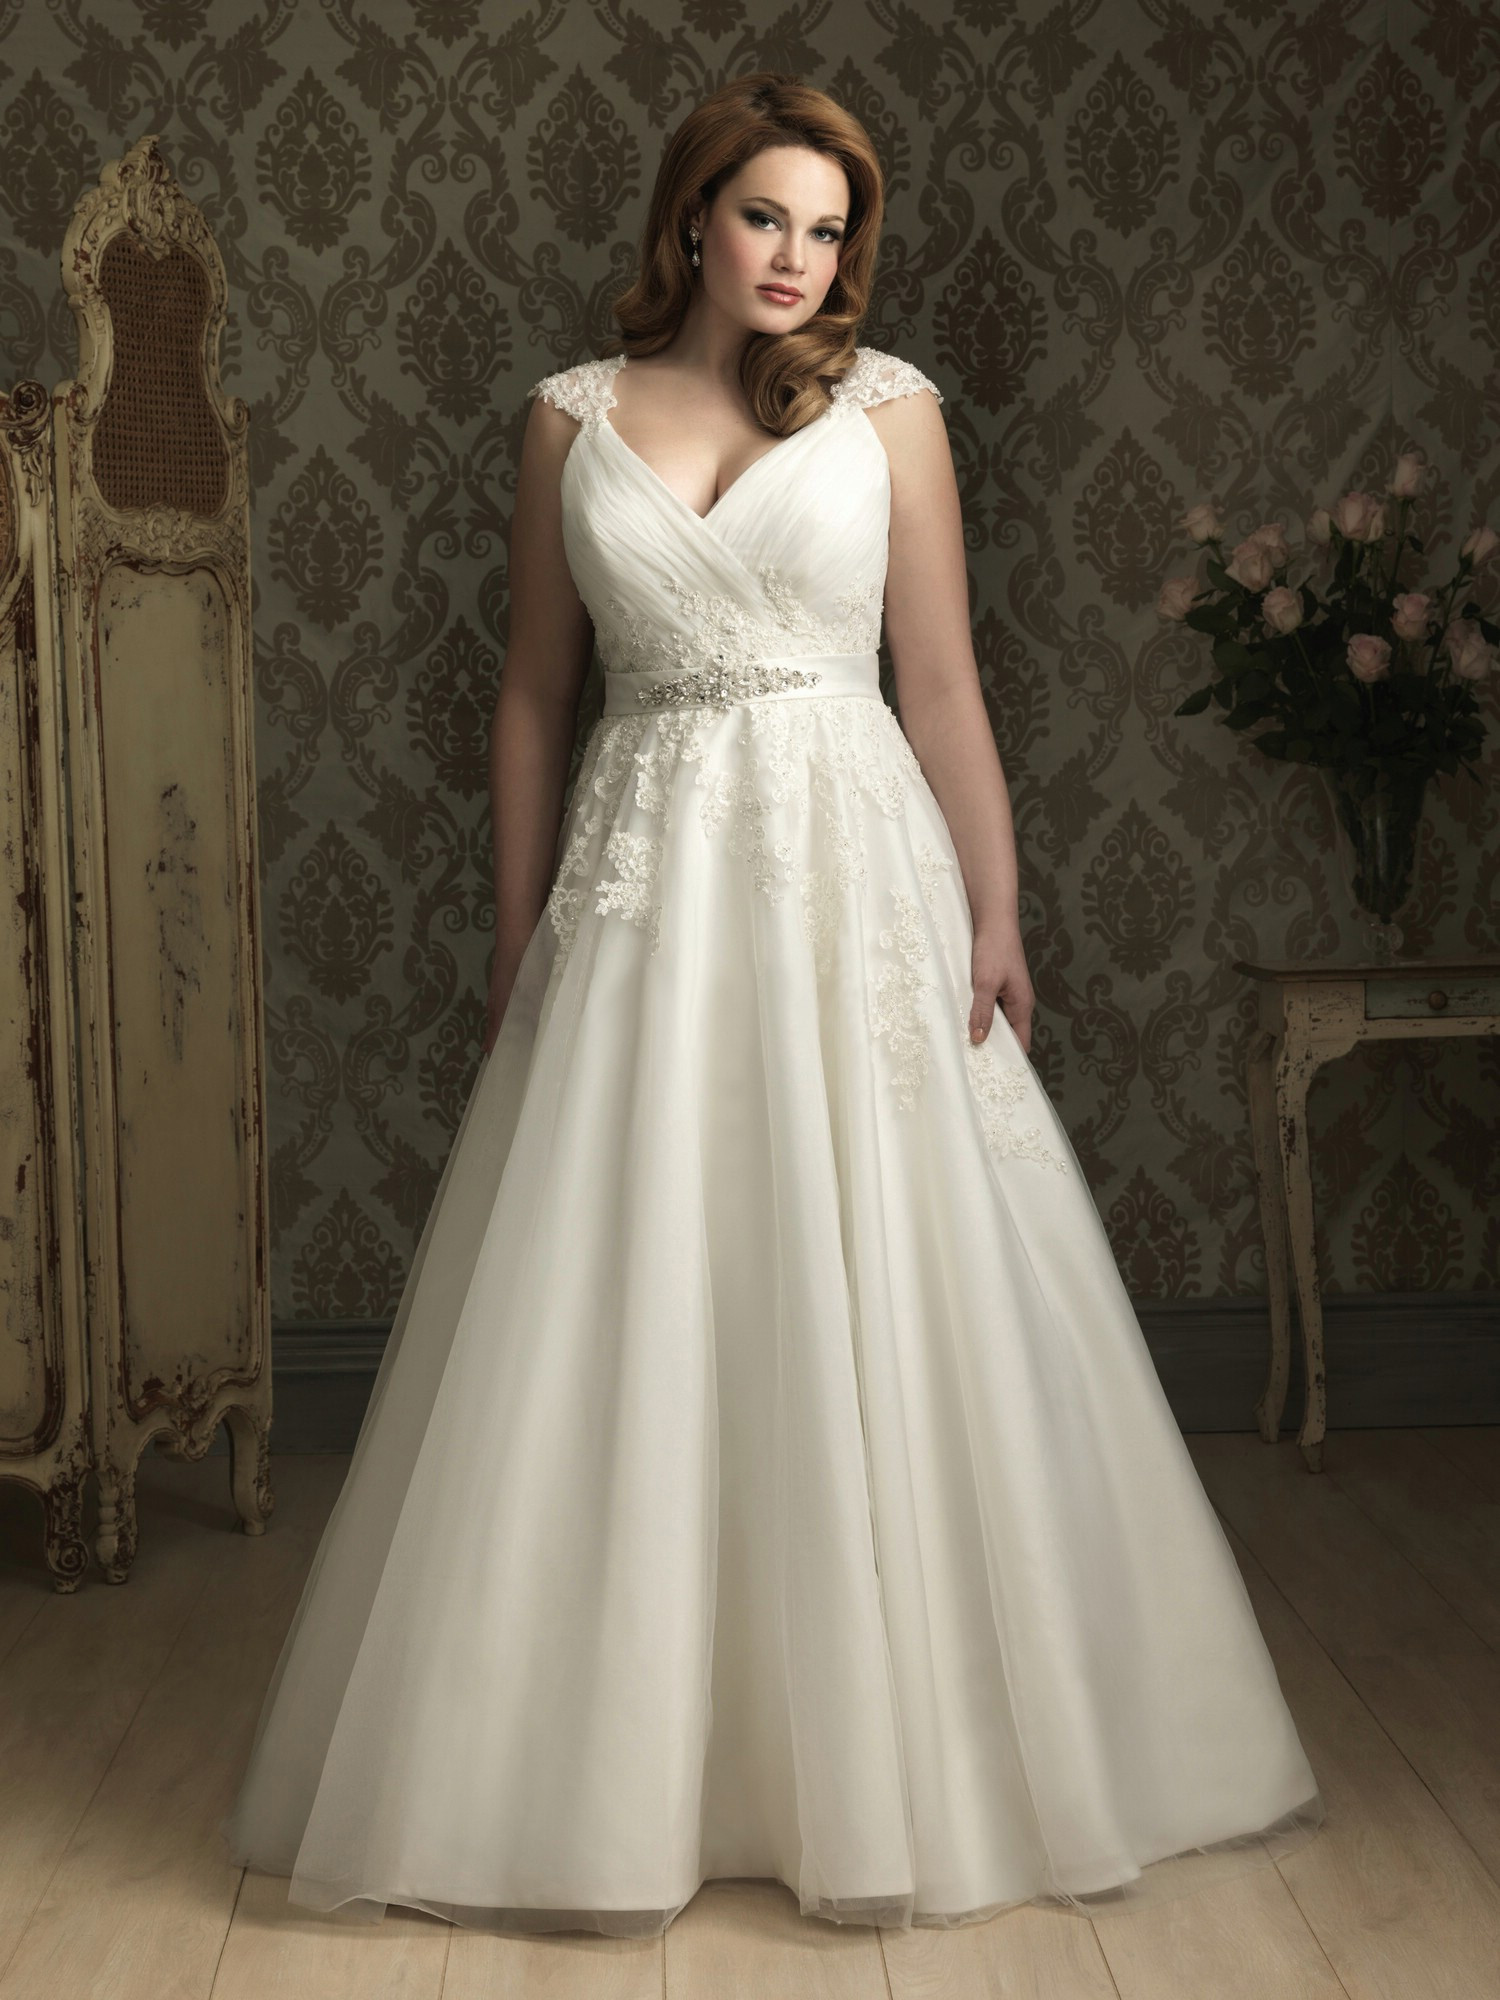 Plus Size Dresses For Wedding
 Plus Size Wedding Dresses Ball Gown